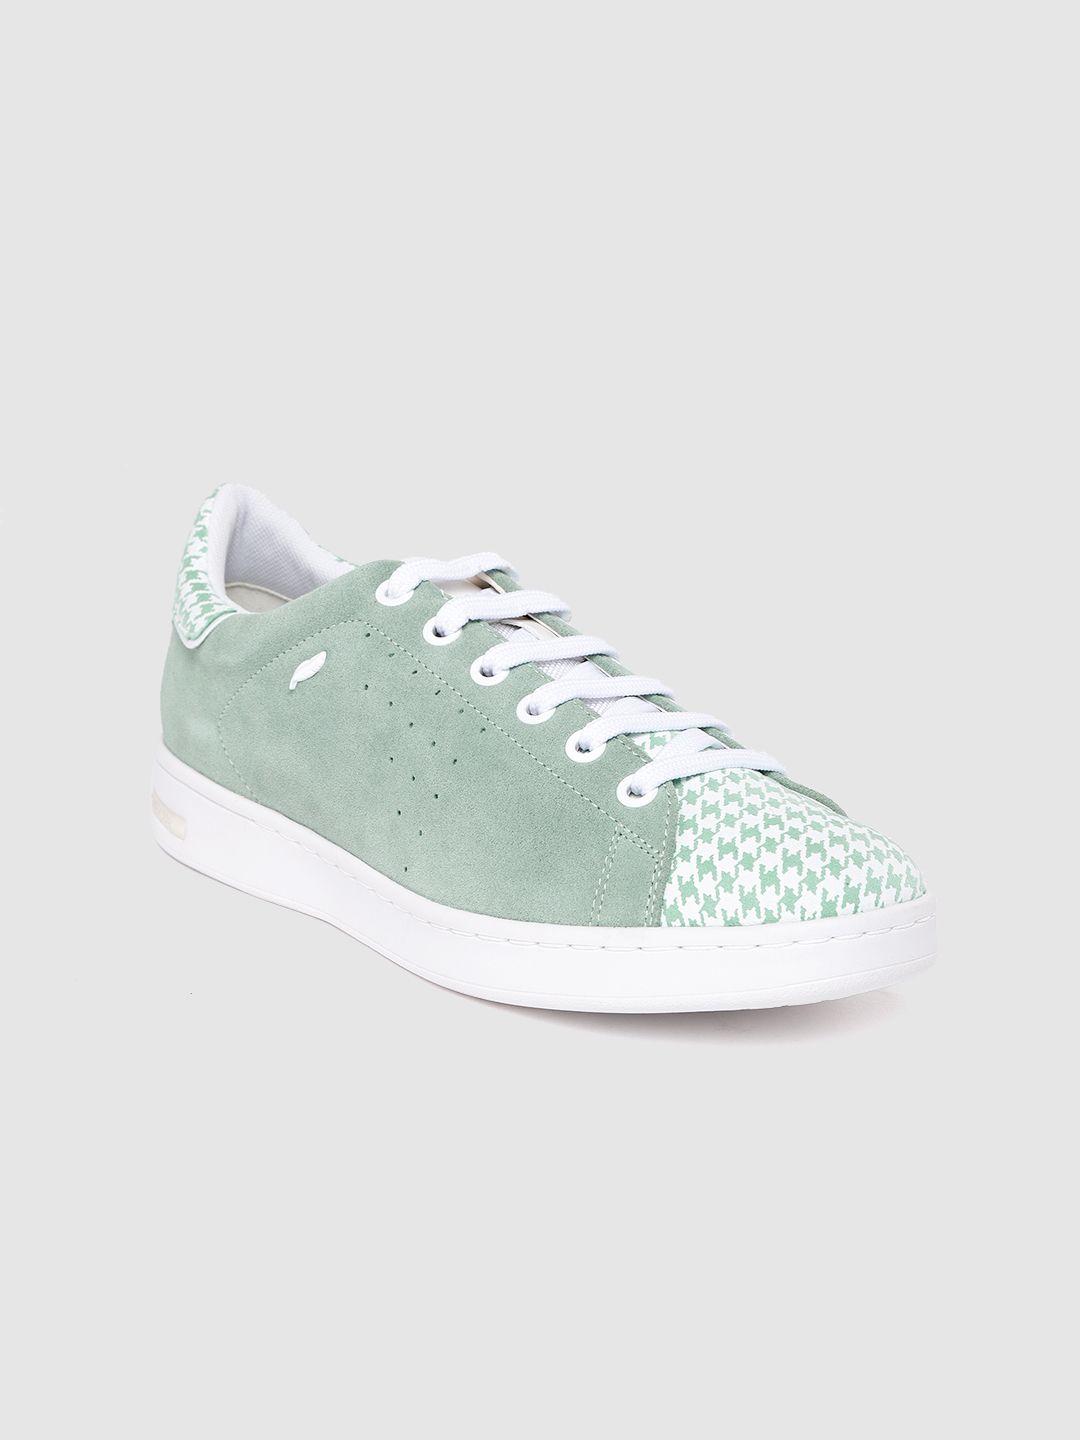 Geox Women White & Green Printed Leather Lightweight Sneakers Price in India